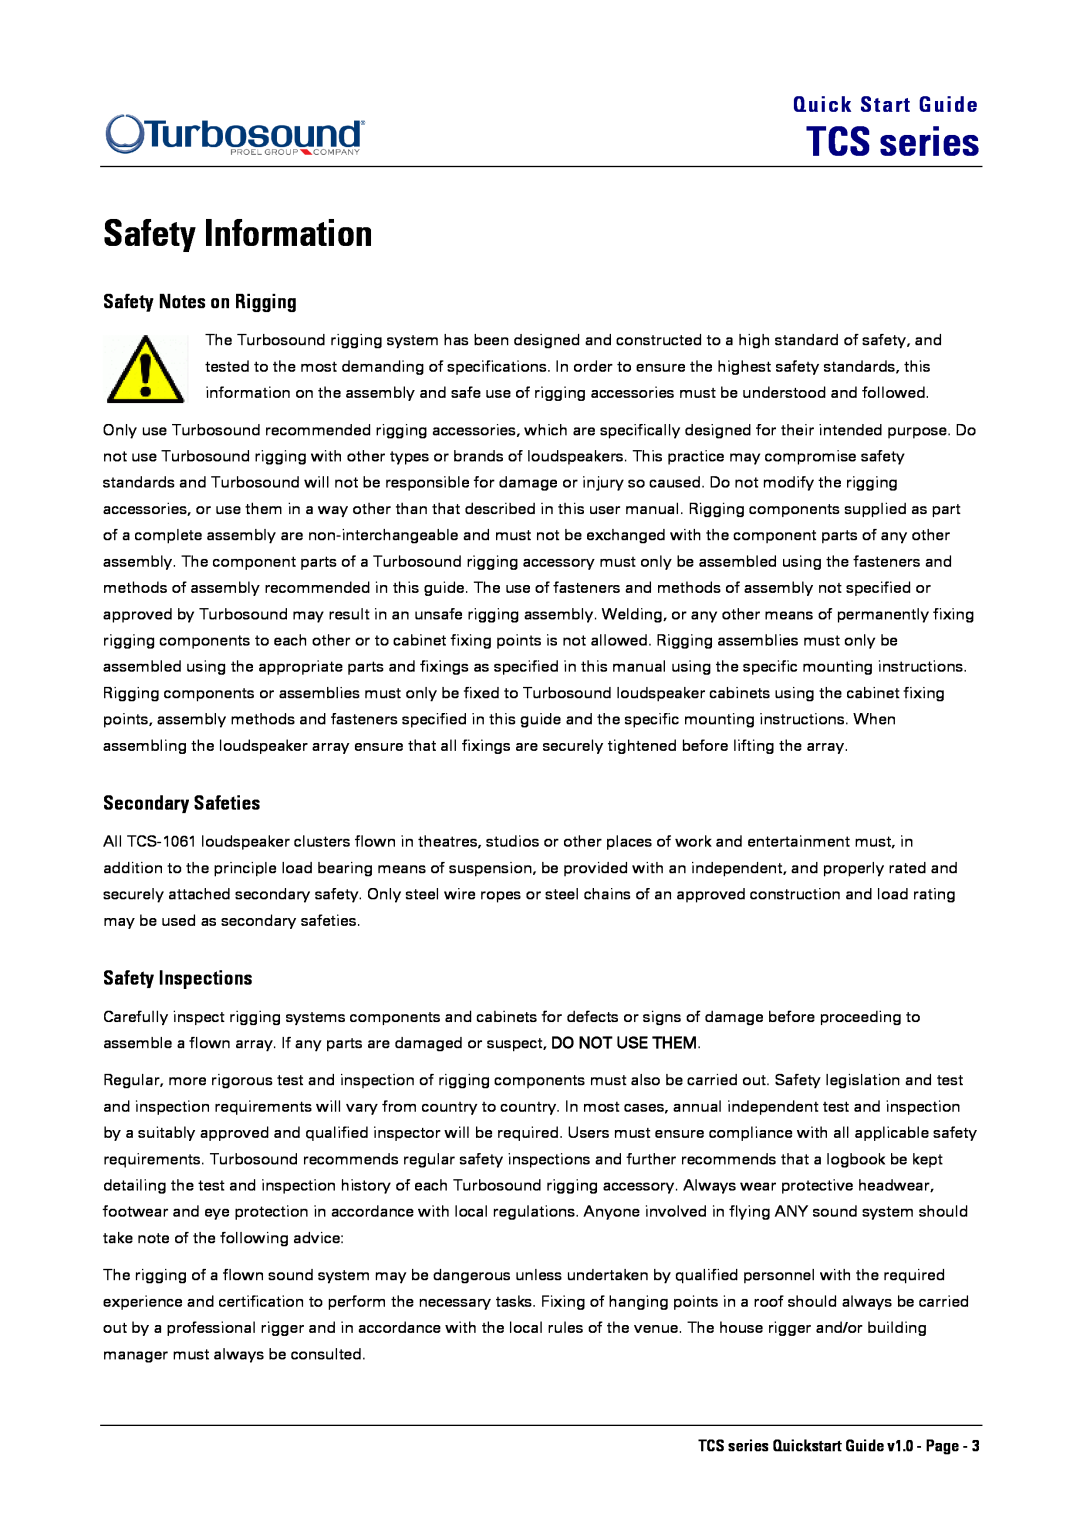 Turbosound TCS-1061 Safety Information, Safety Notes on Rigging, Secondary Safeties, Safety Inspections, TCS series 